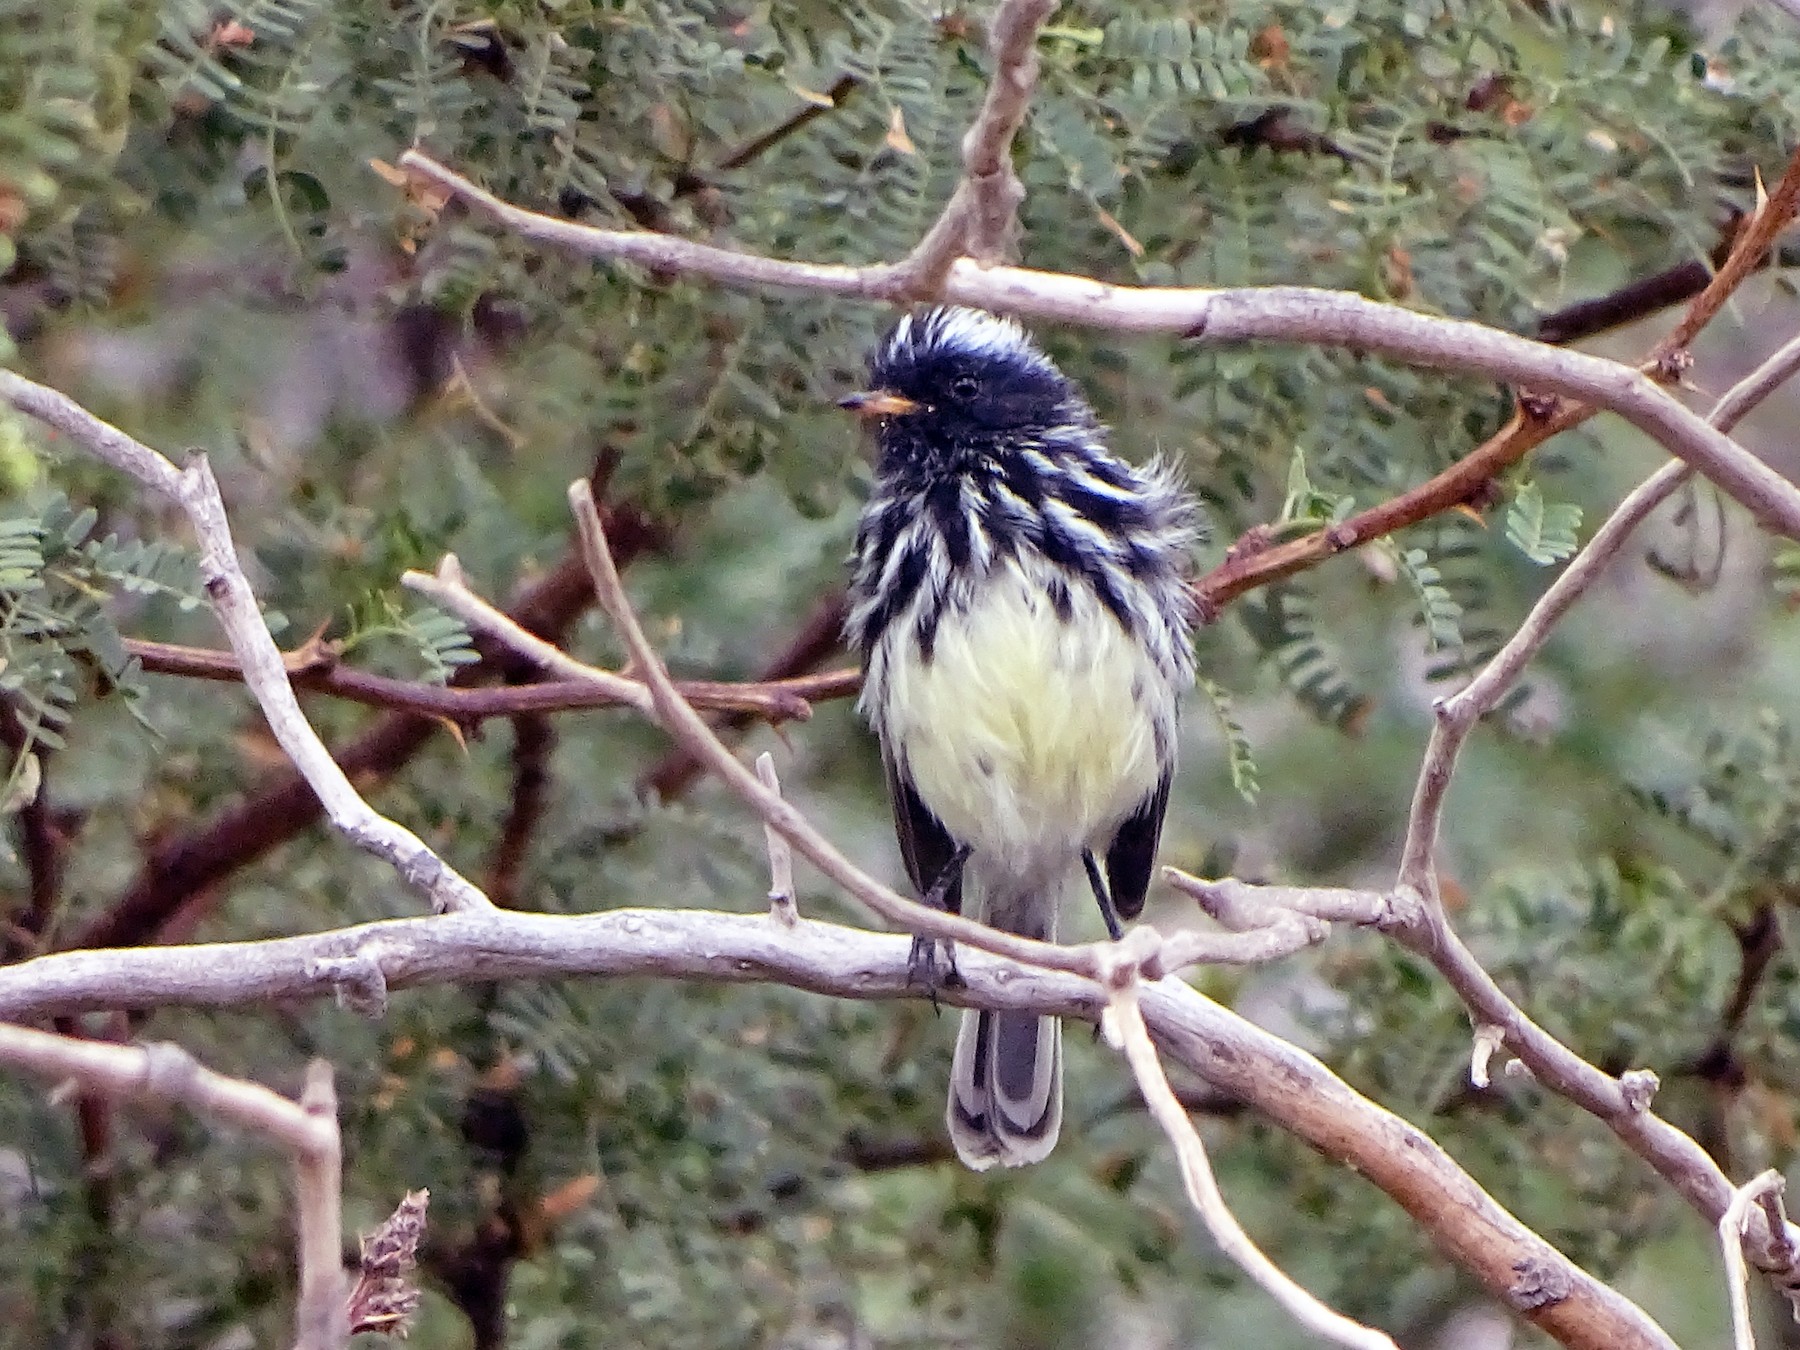 Pied-crested Tit-Tyrant - Charly Moreno Taucare